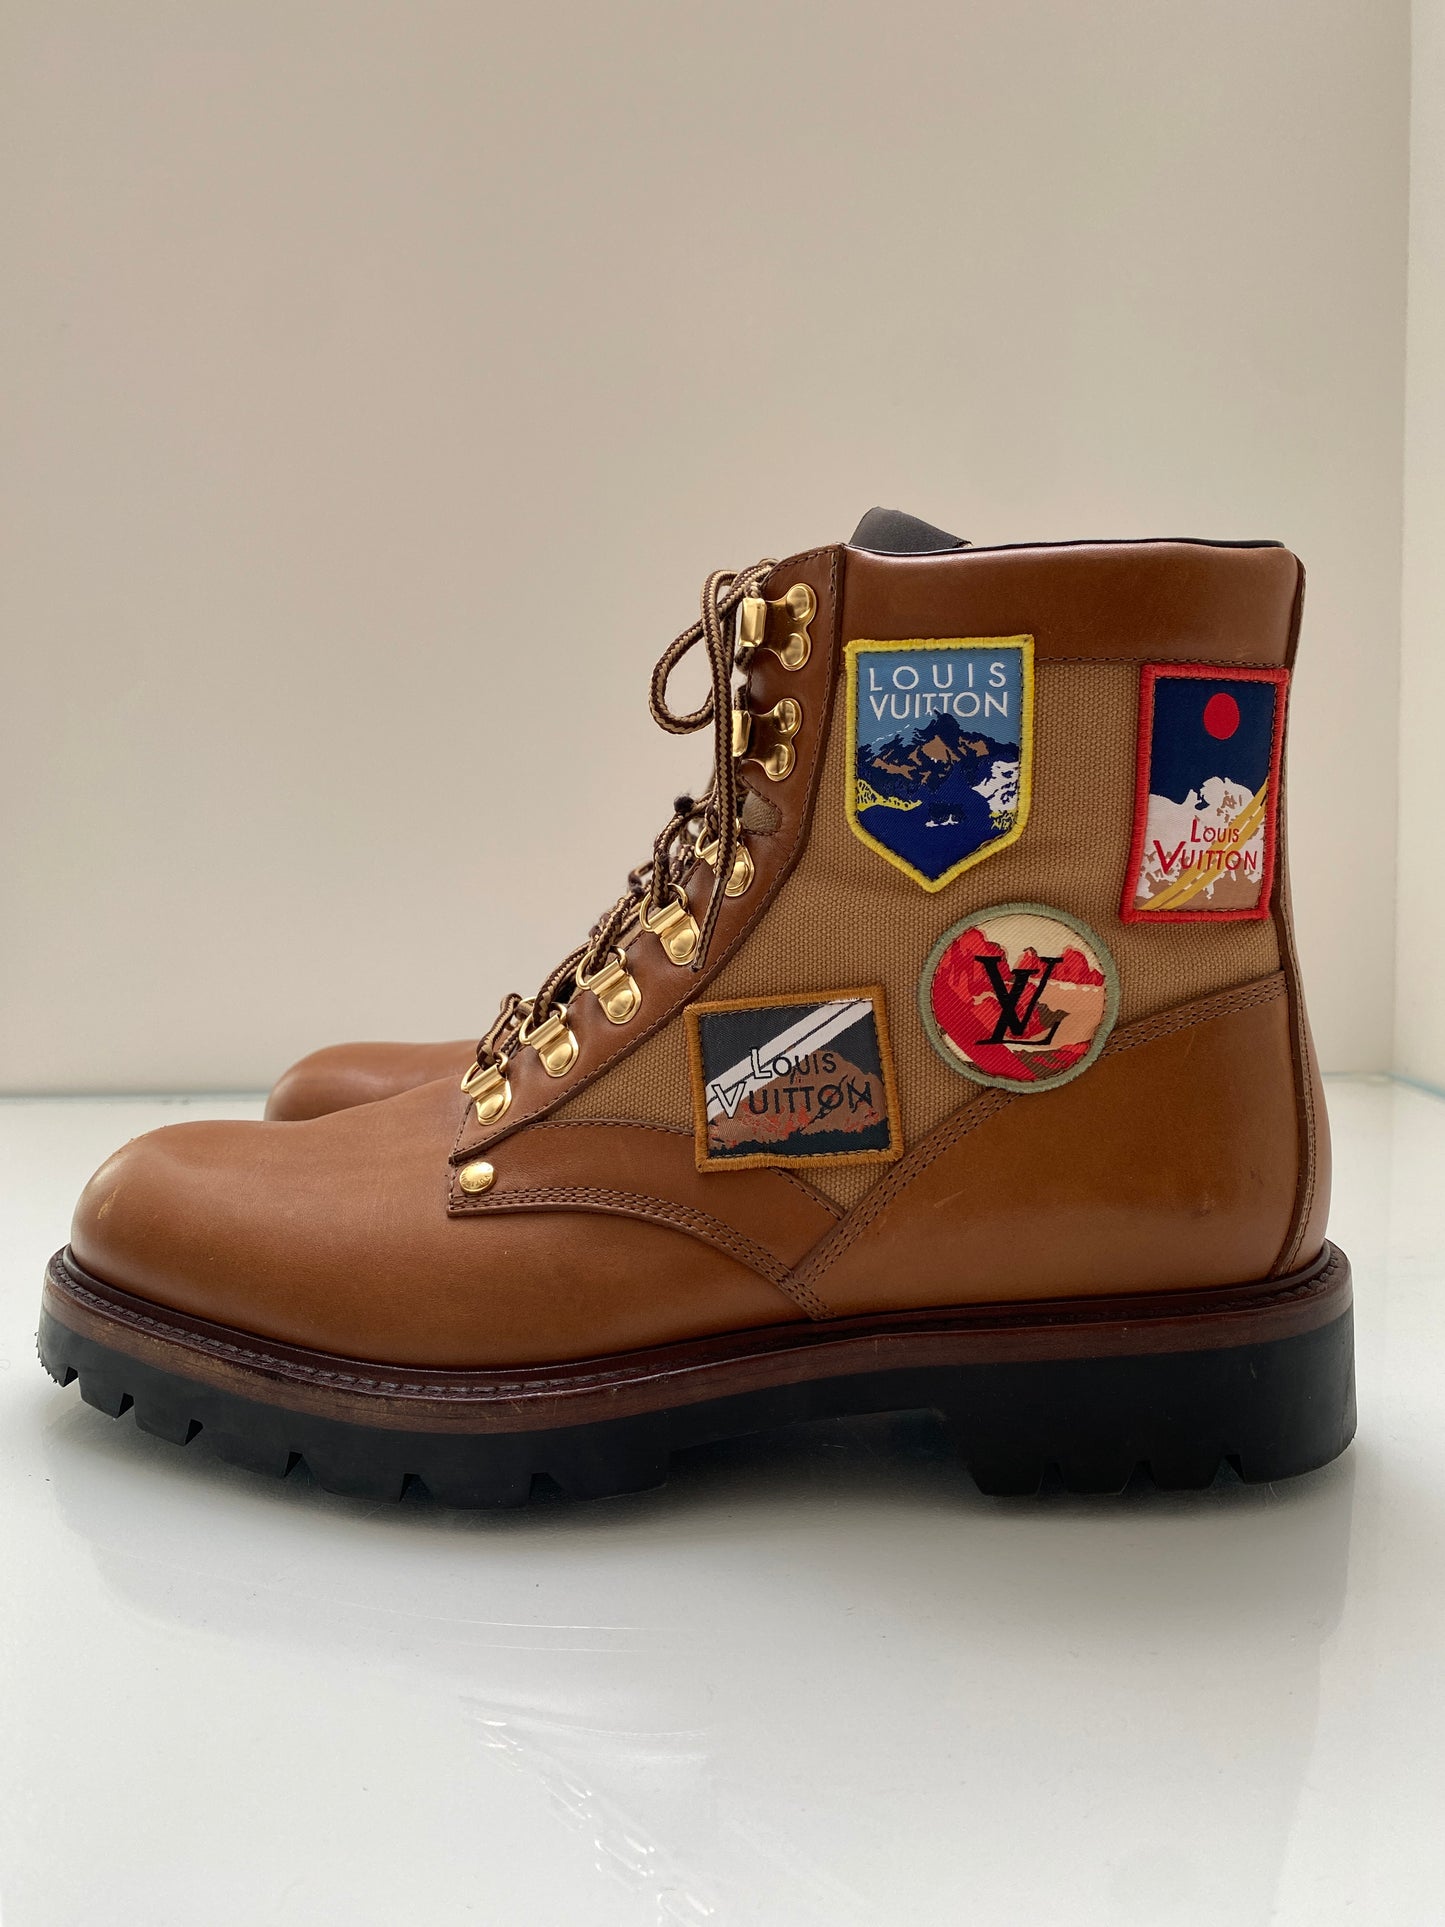 Louis Vuitton Brown Leather Hiking Boots w Patches, 8.5